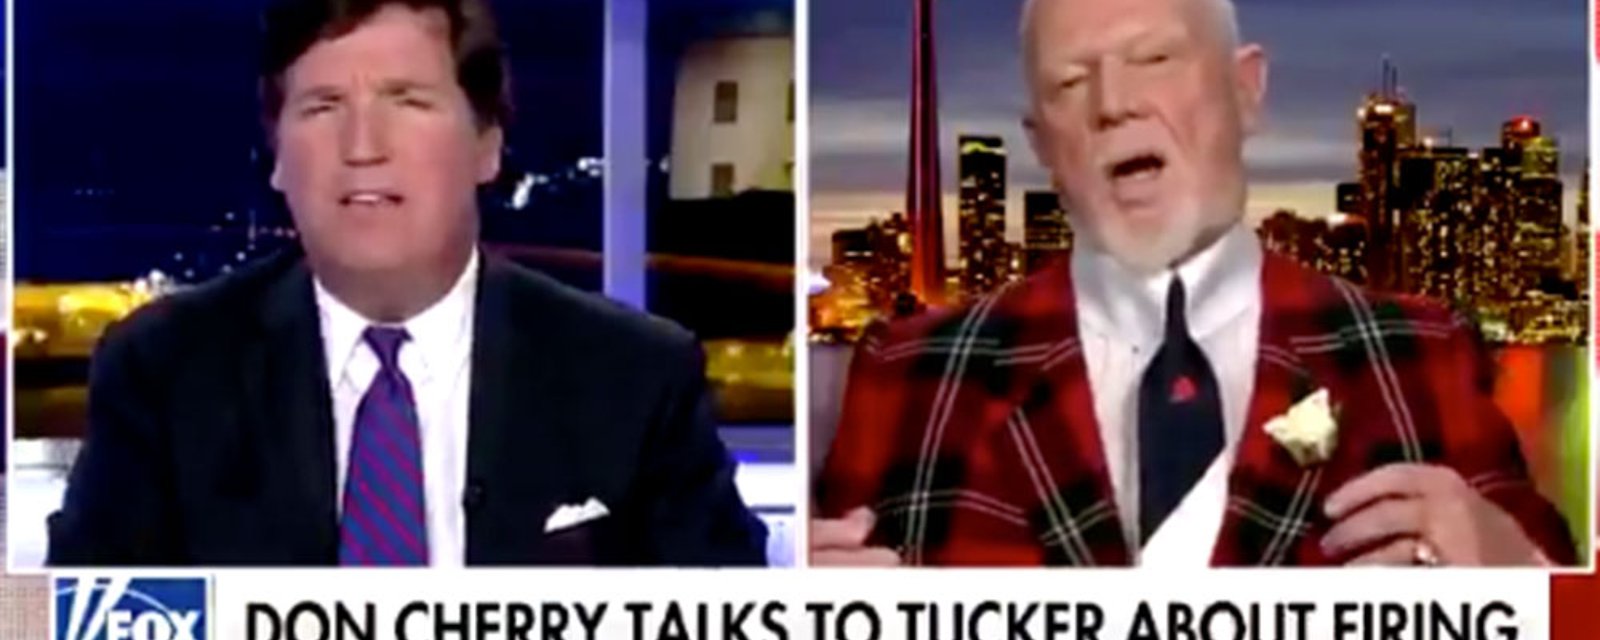 Cherry appears on Fox News, insists he regrets use of phrase “you people”